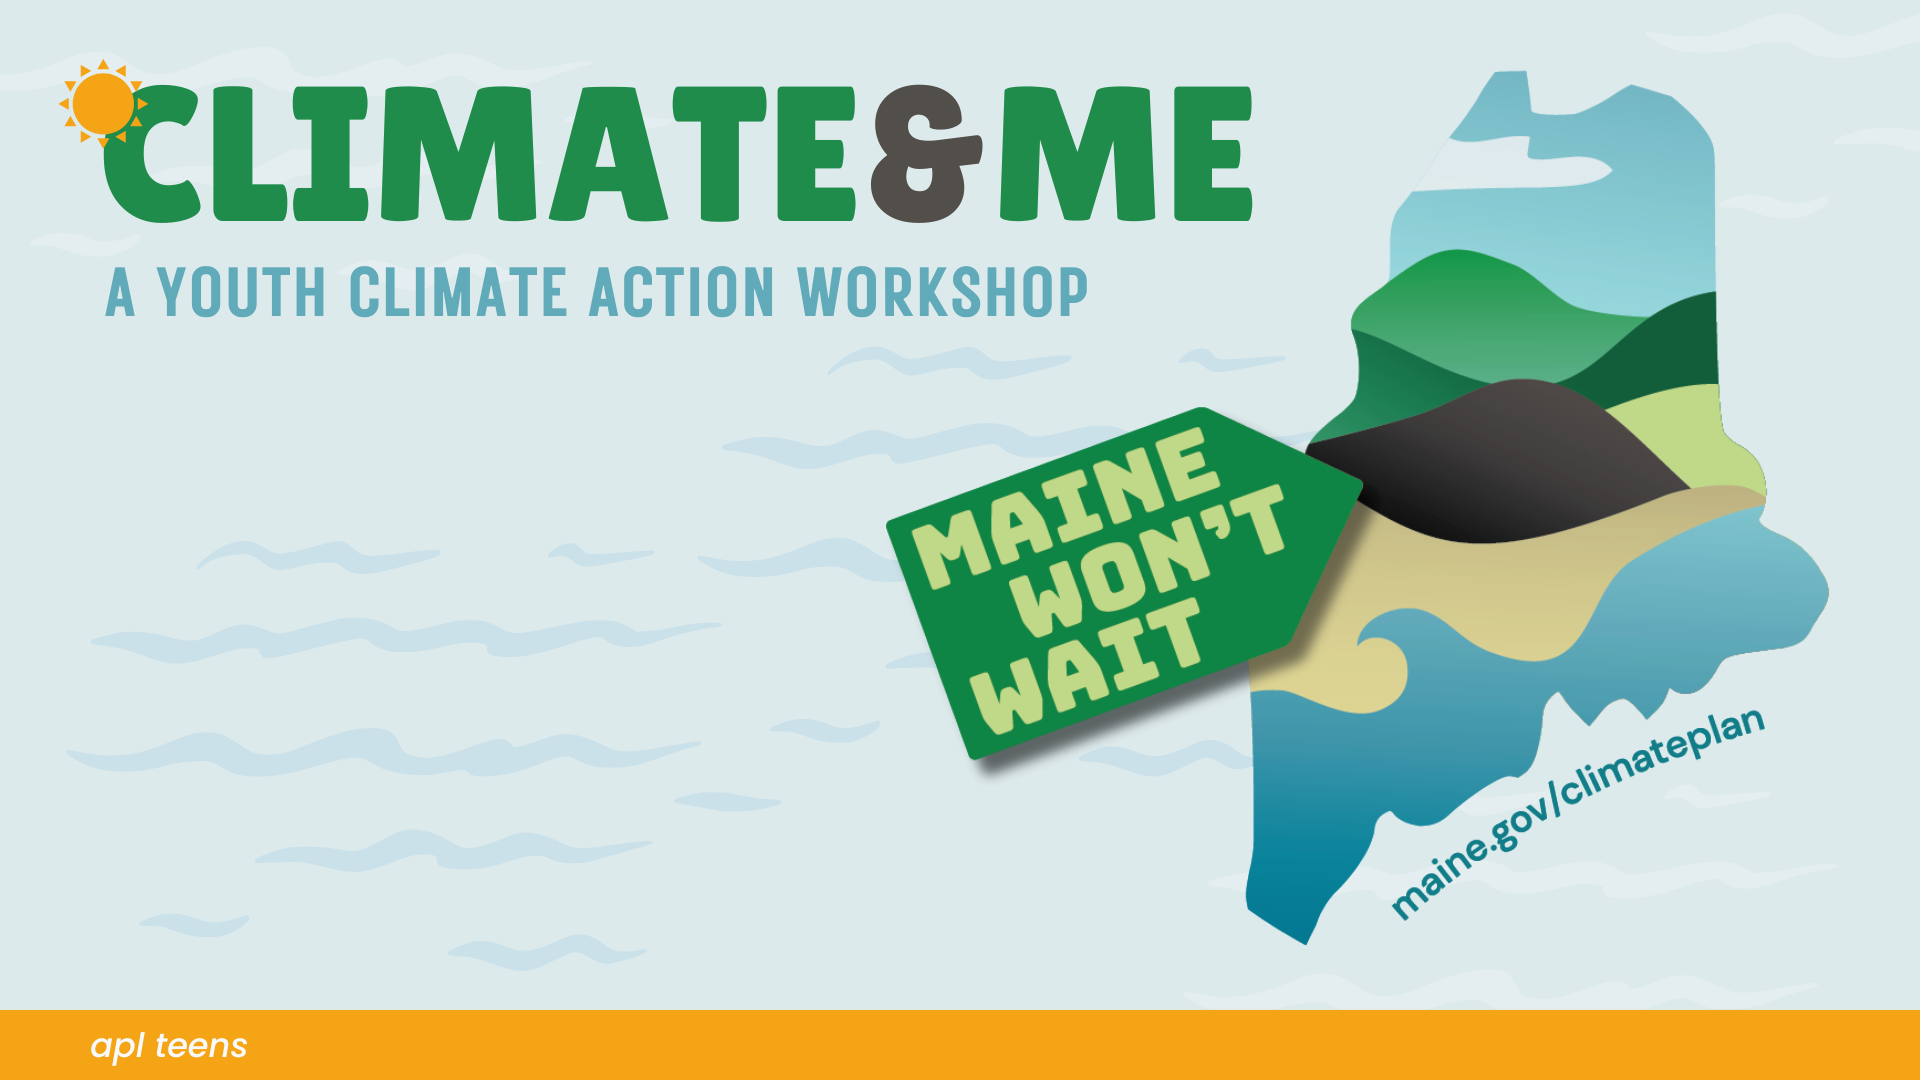 An image that reads CLIMATE&ME A youth climate action workshop. On the bottom of the image, there is a yellow banner that reads a p l teens. with a graphic of the state of Maine on the right